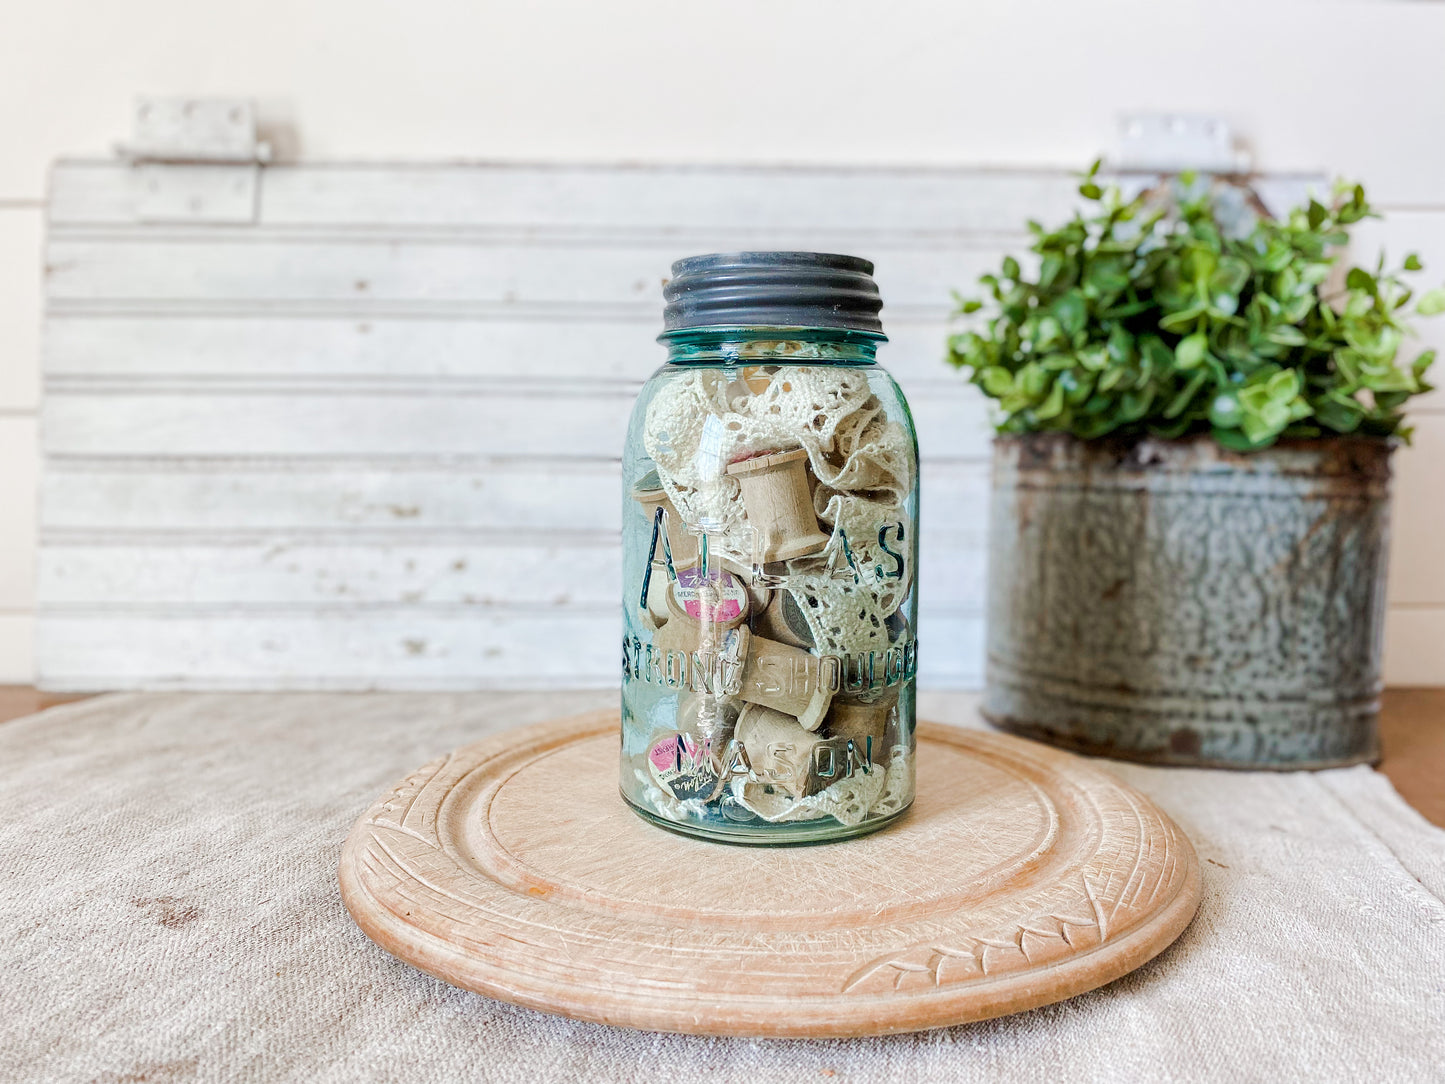 Antique Glass Canning Jar with Spools and Lace | Atlas Strong Shoulder Blue Quart Jar with Zinc Porcelain Screw Top Lid | Instant Collection